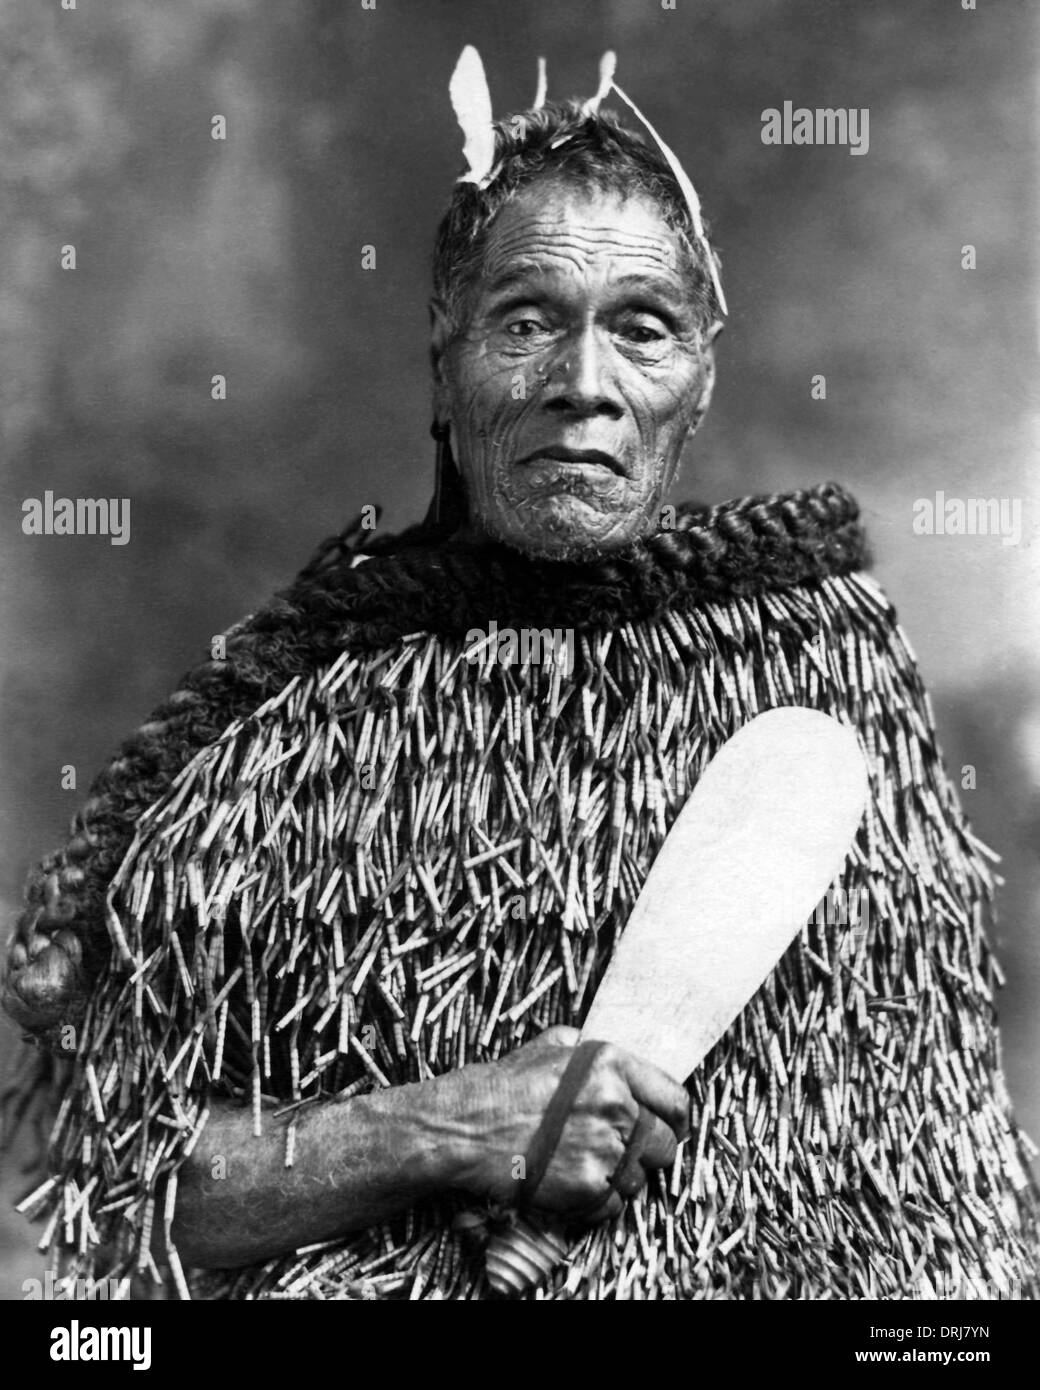 Maori Chief High Resolution Stock Photography And Images Alamy